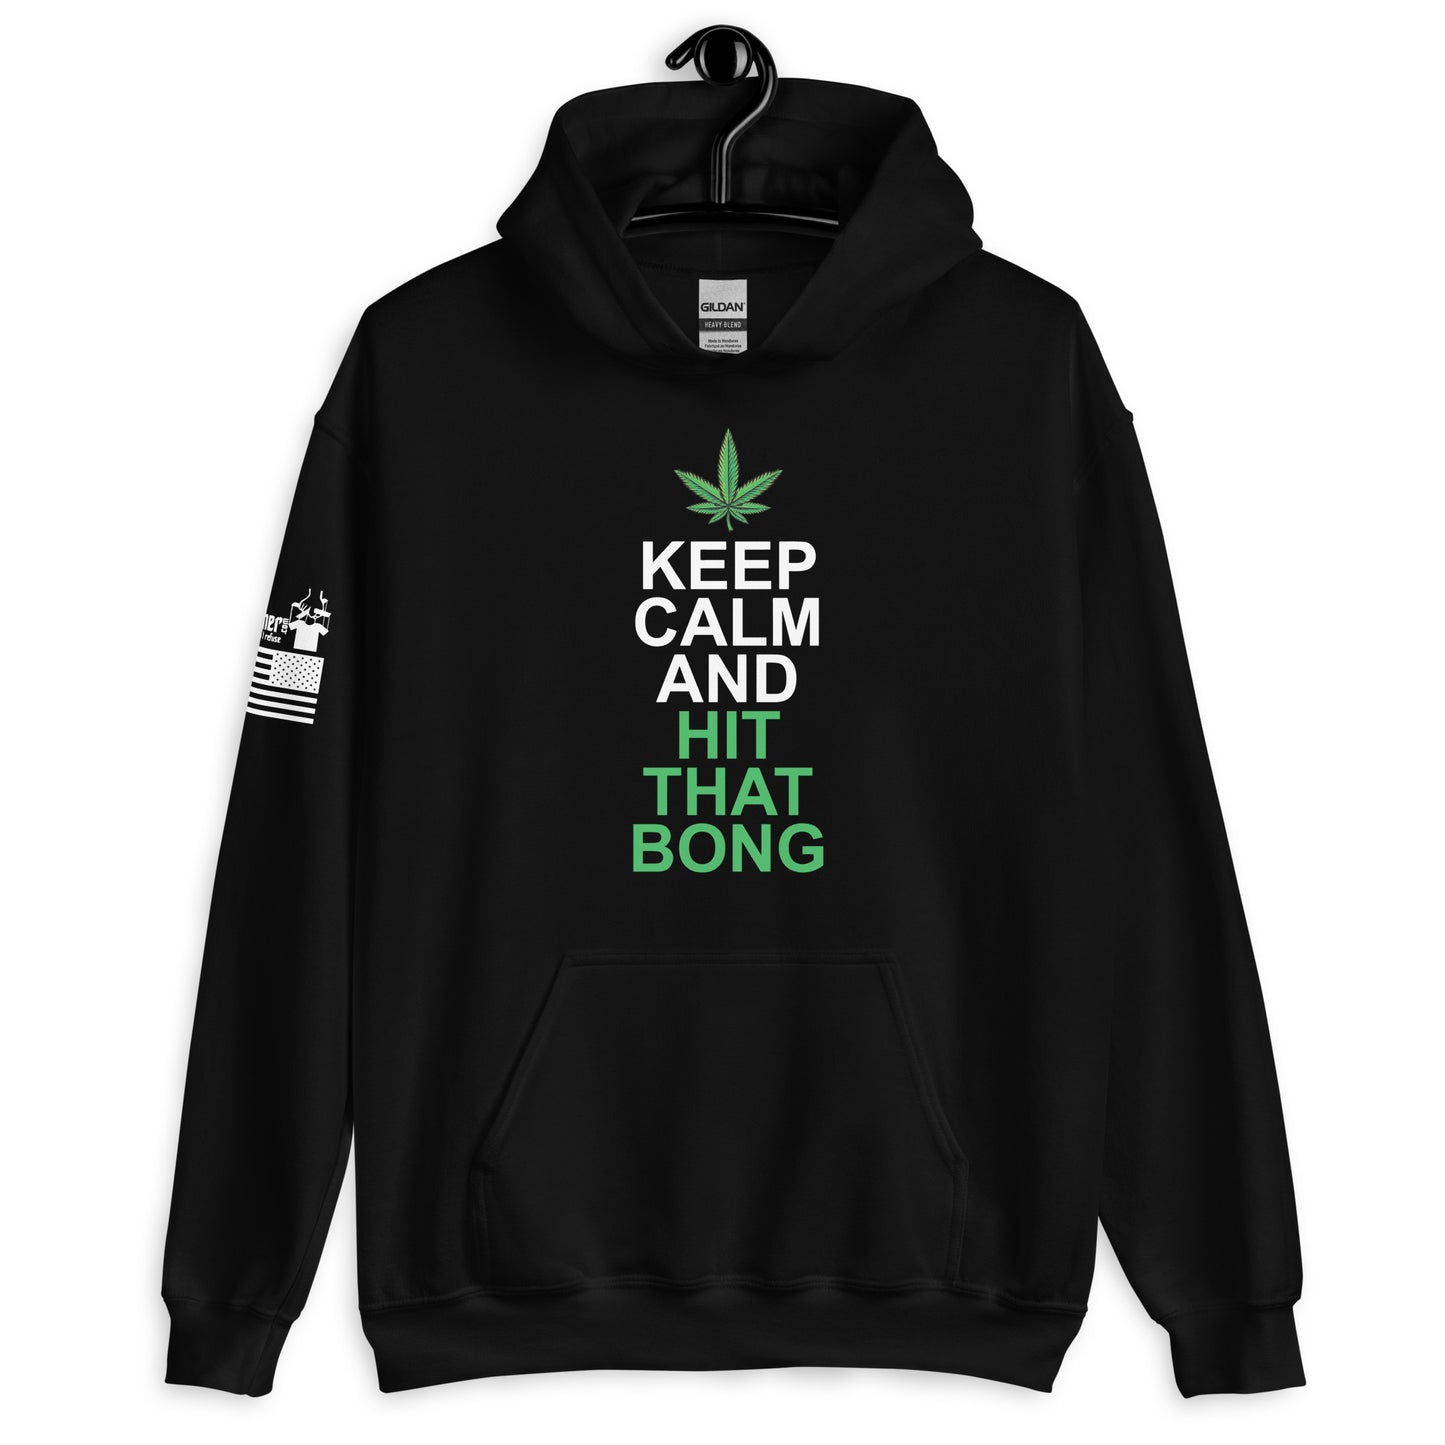 Keep Calm and hit the Bong - Hoodie (unisex) | TheShirtfather